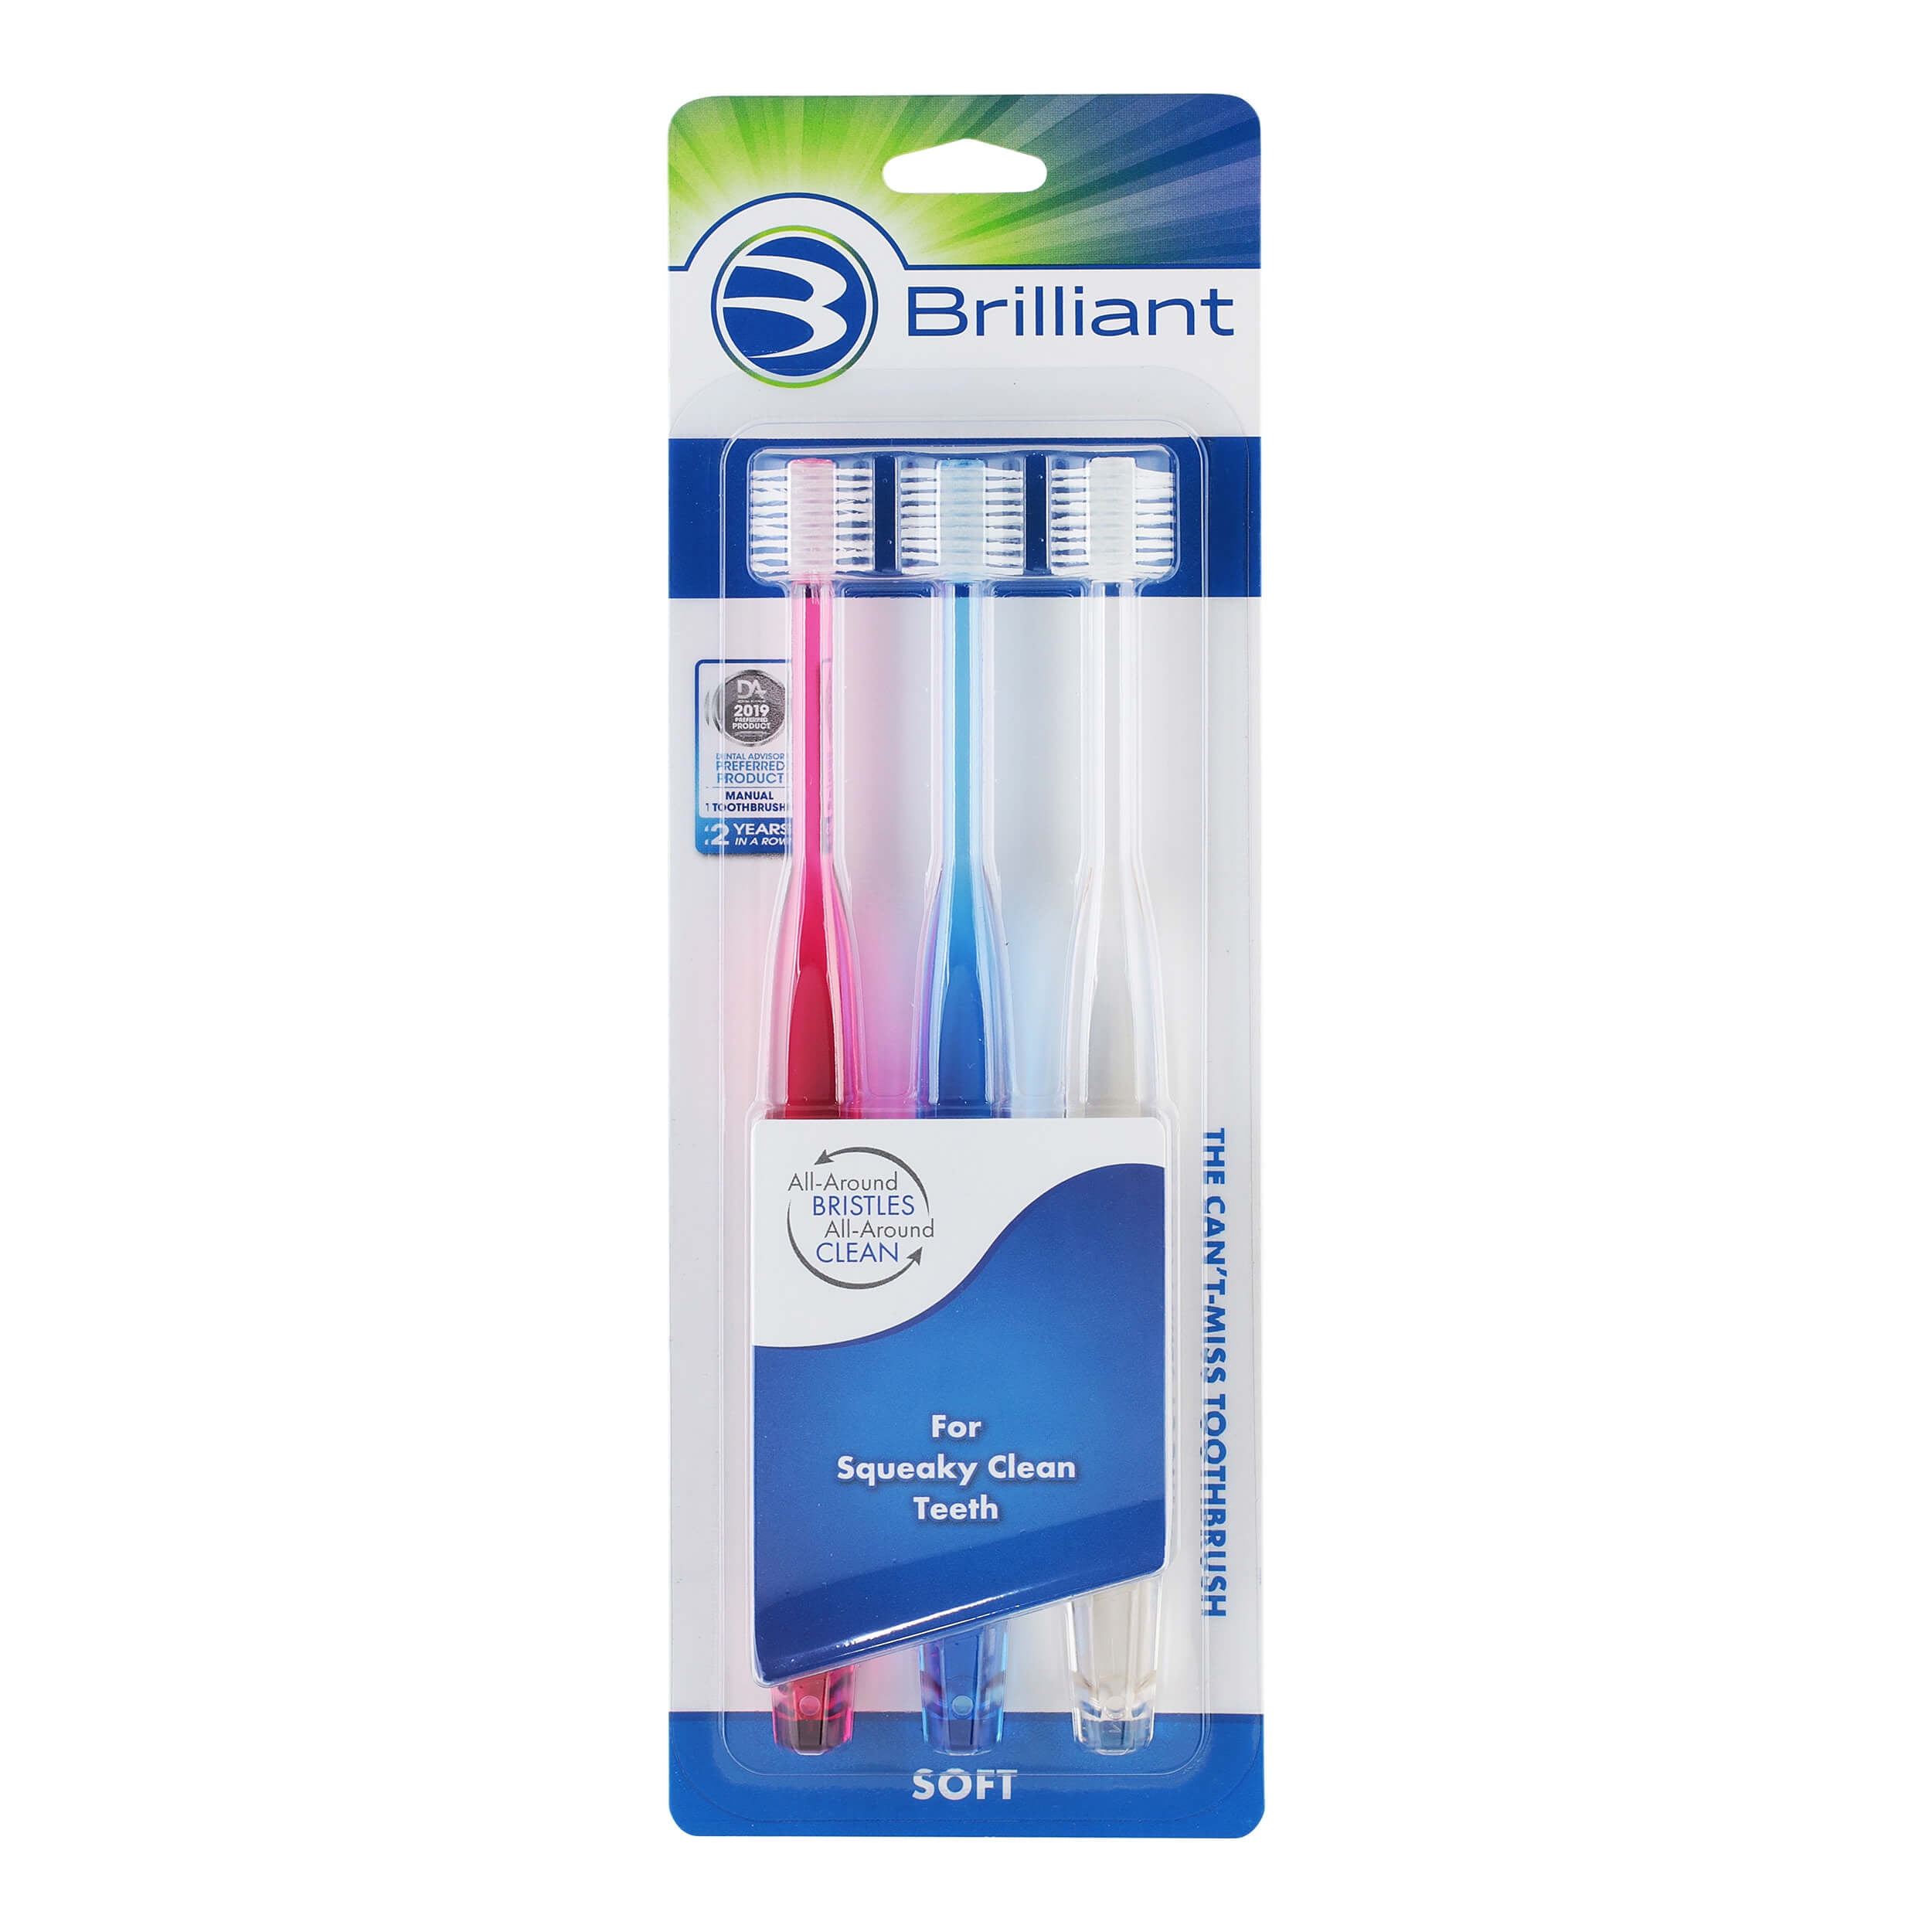 SparkBrush Soft-Bristle Gentle on All Metals, Jewelry, & Watches